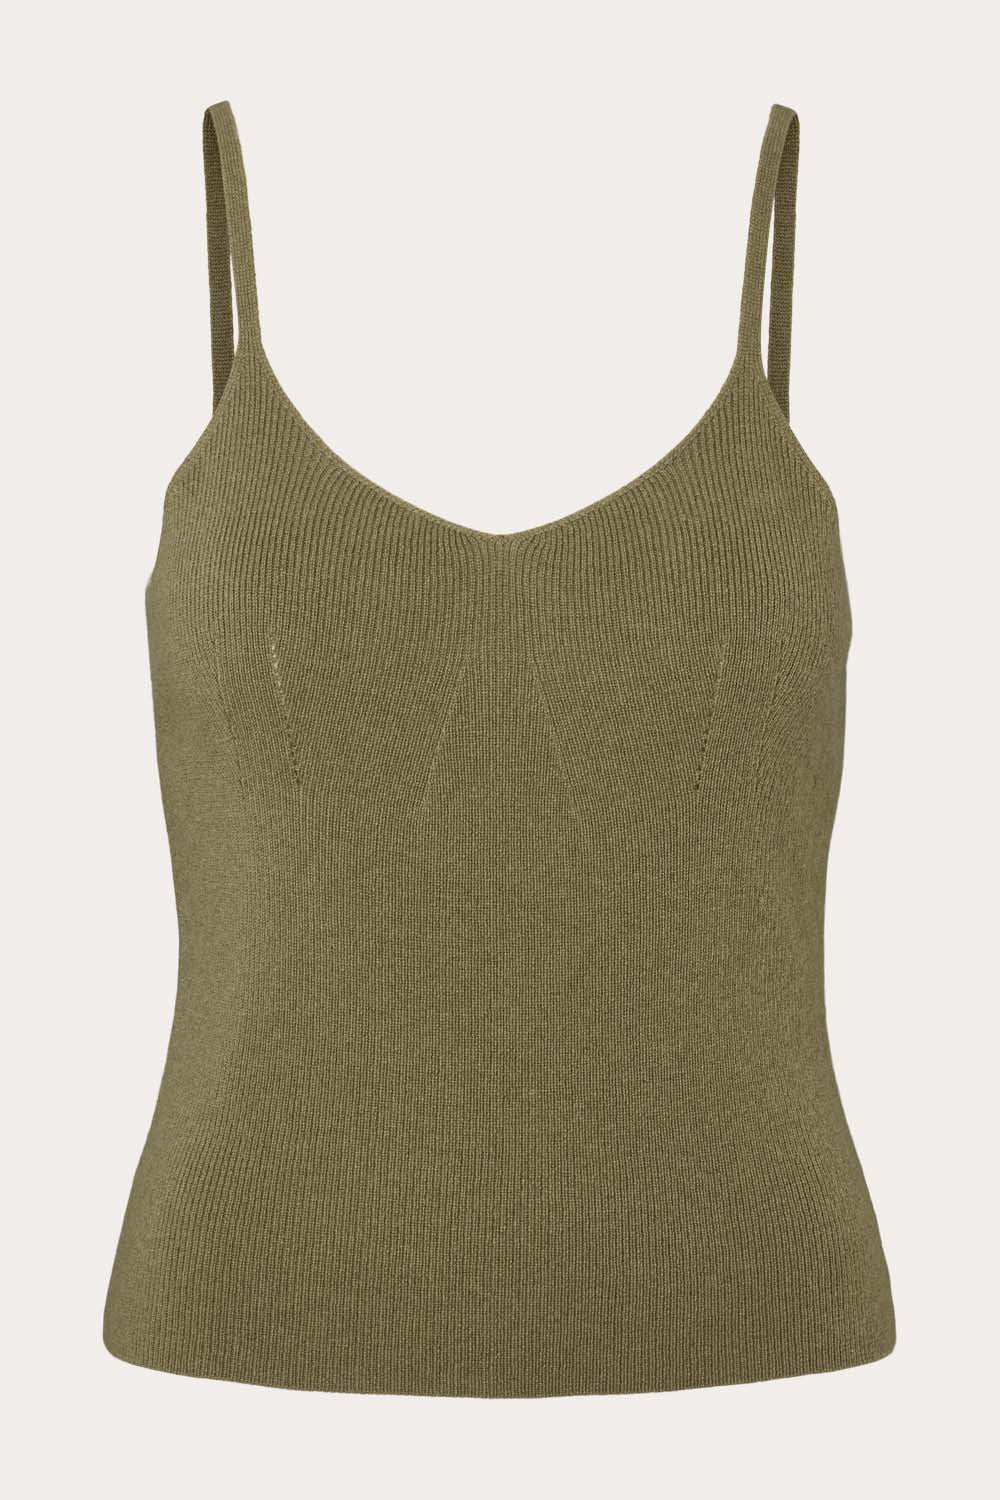 Lot of 2 -Women's XS Slim Fit Cropped Cami Tank Top, Olive Green, by Wild  Fable